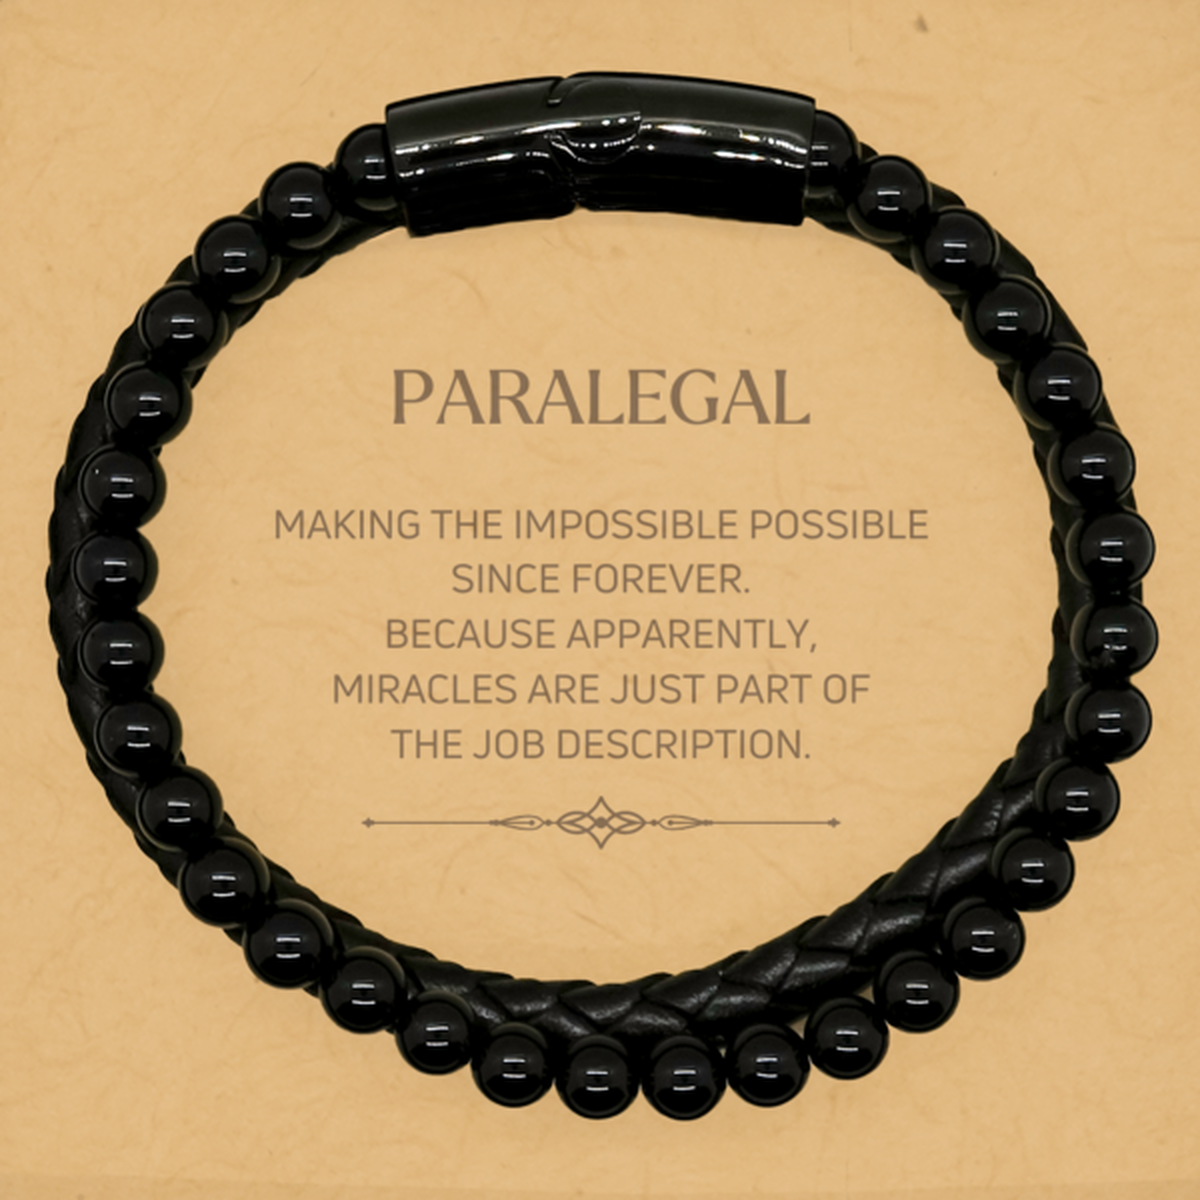 Funny Paralegal Gifts, Miracles are just part of the job description, Inspirational Birthday Stone Leather Bracelets For Paralegal, Men, Women, Coworkers, Friends, Boss